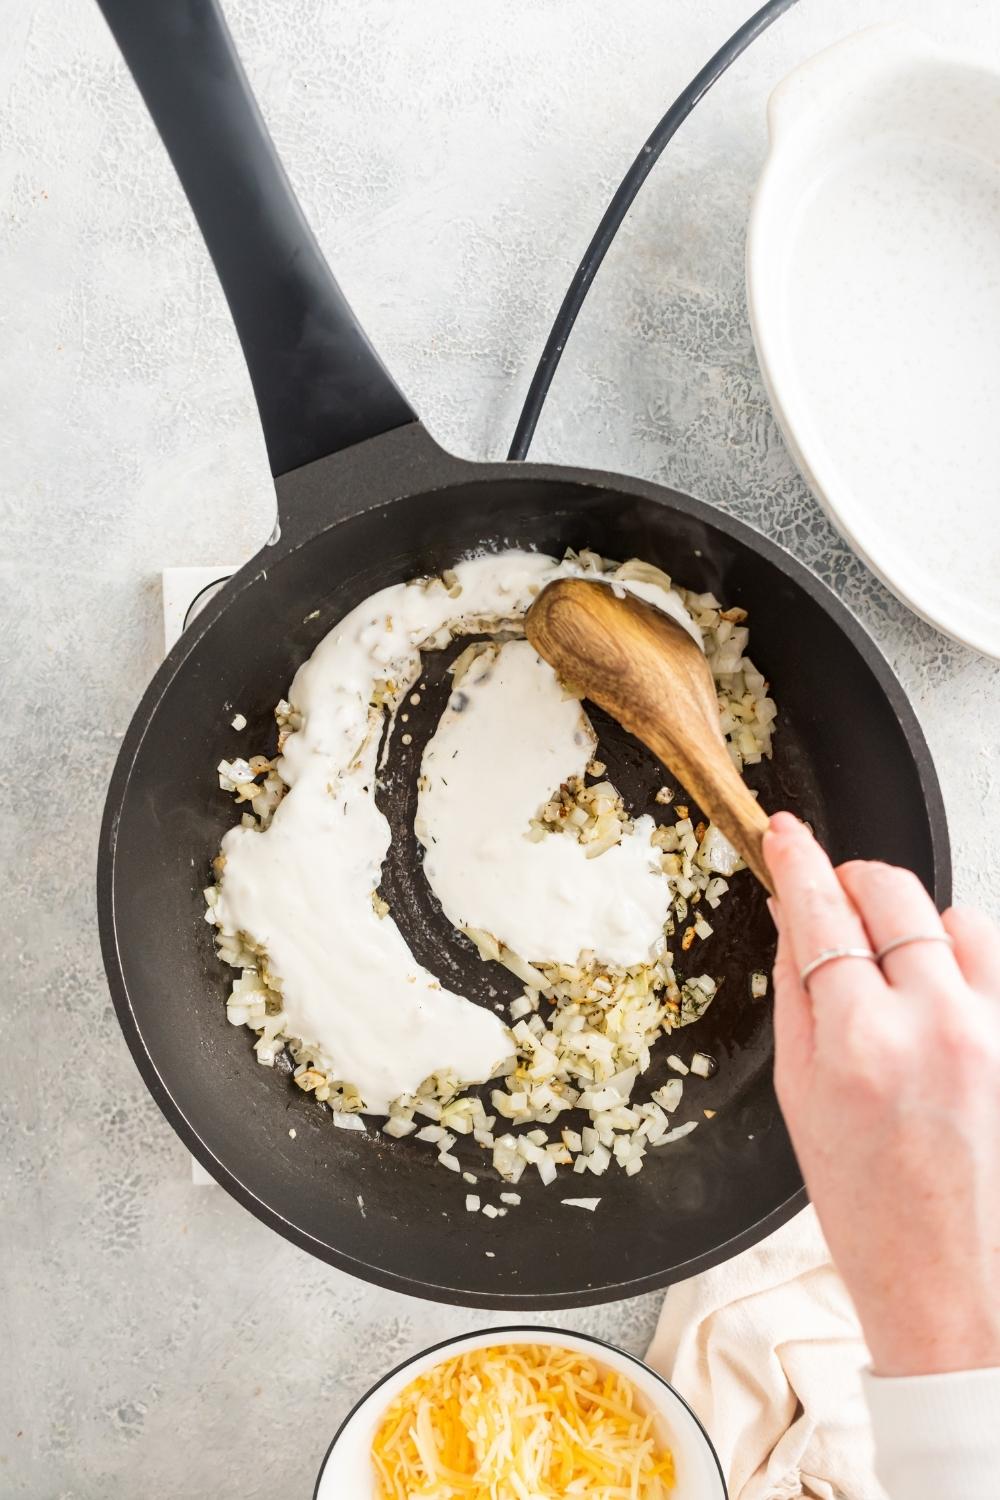 An overhead view of a skillet with a hand holding a wooden spoon stirring cream into the cooked garlic and onion mixture.